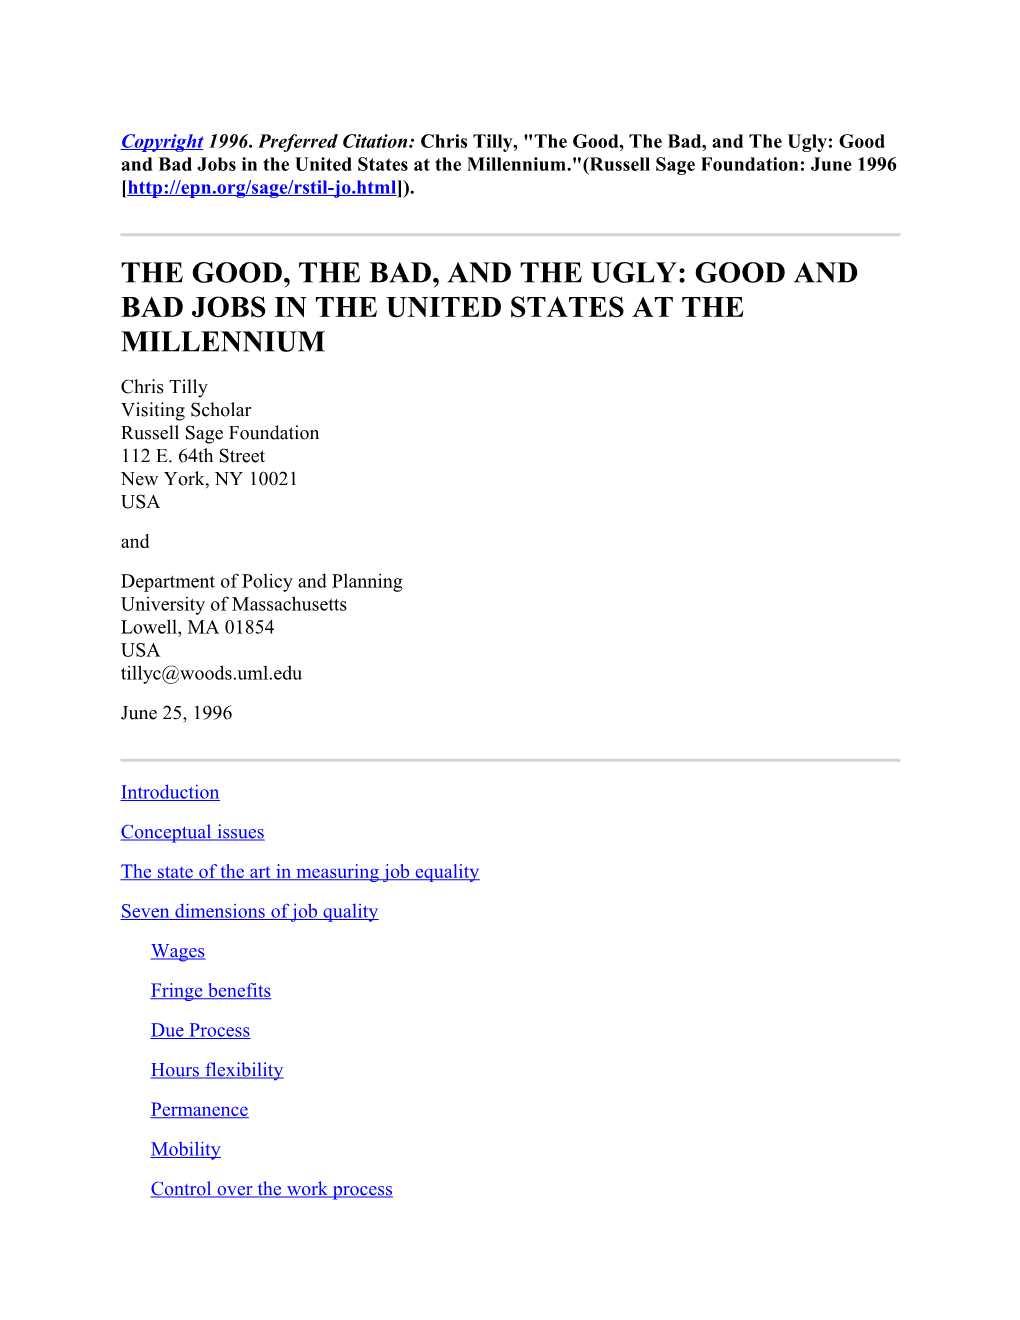 Russell Sage Foundation, Chris Tilly, the Good, the Bad, and the Ugly: Good and Bad Jobs